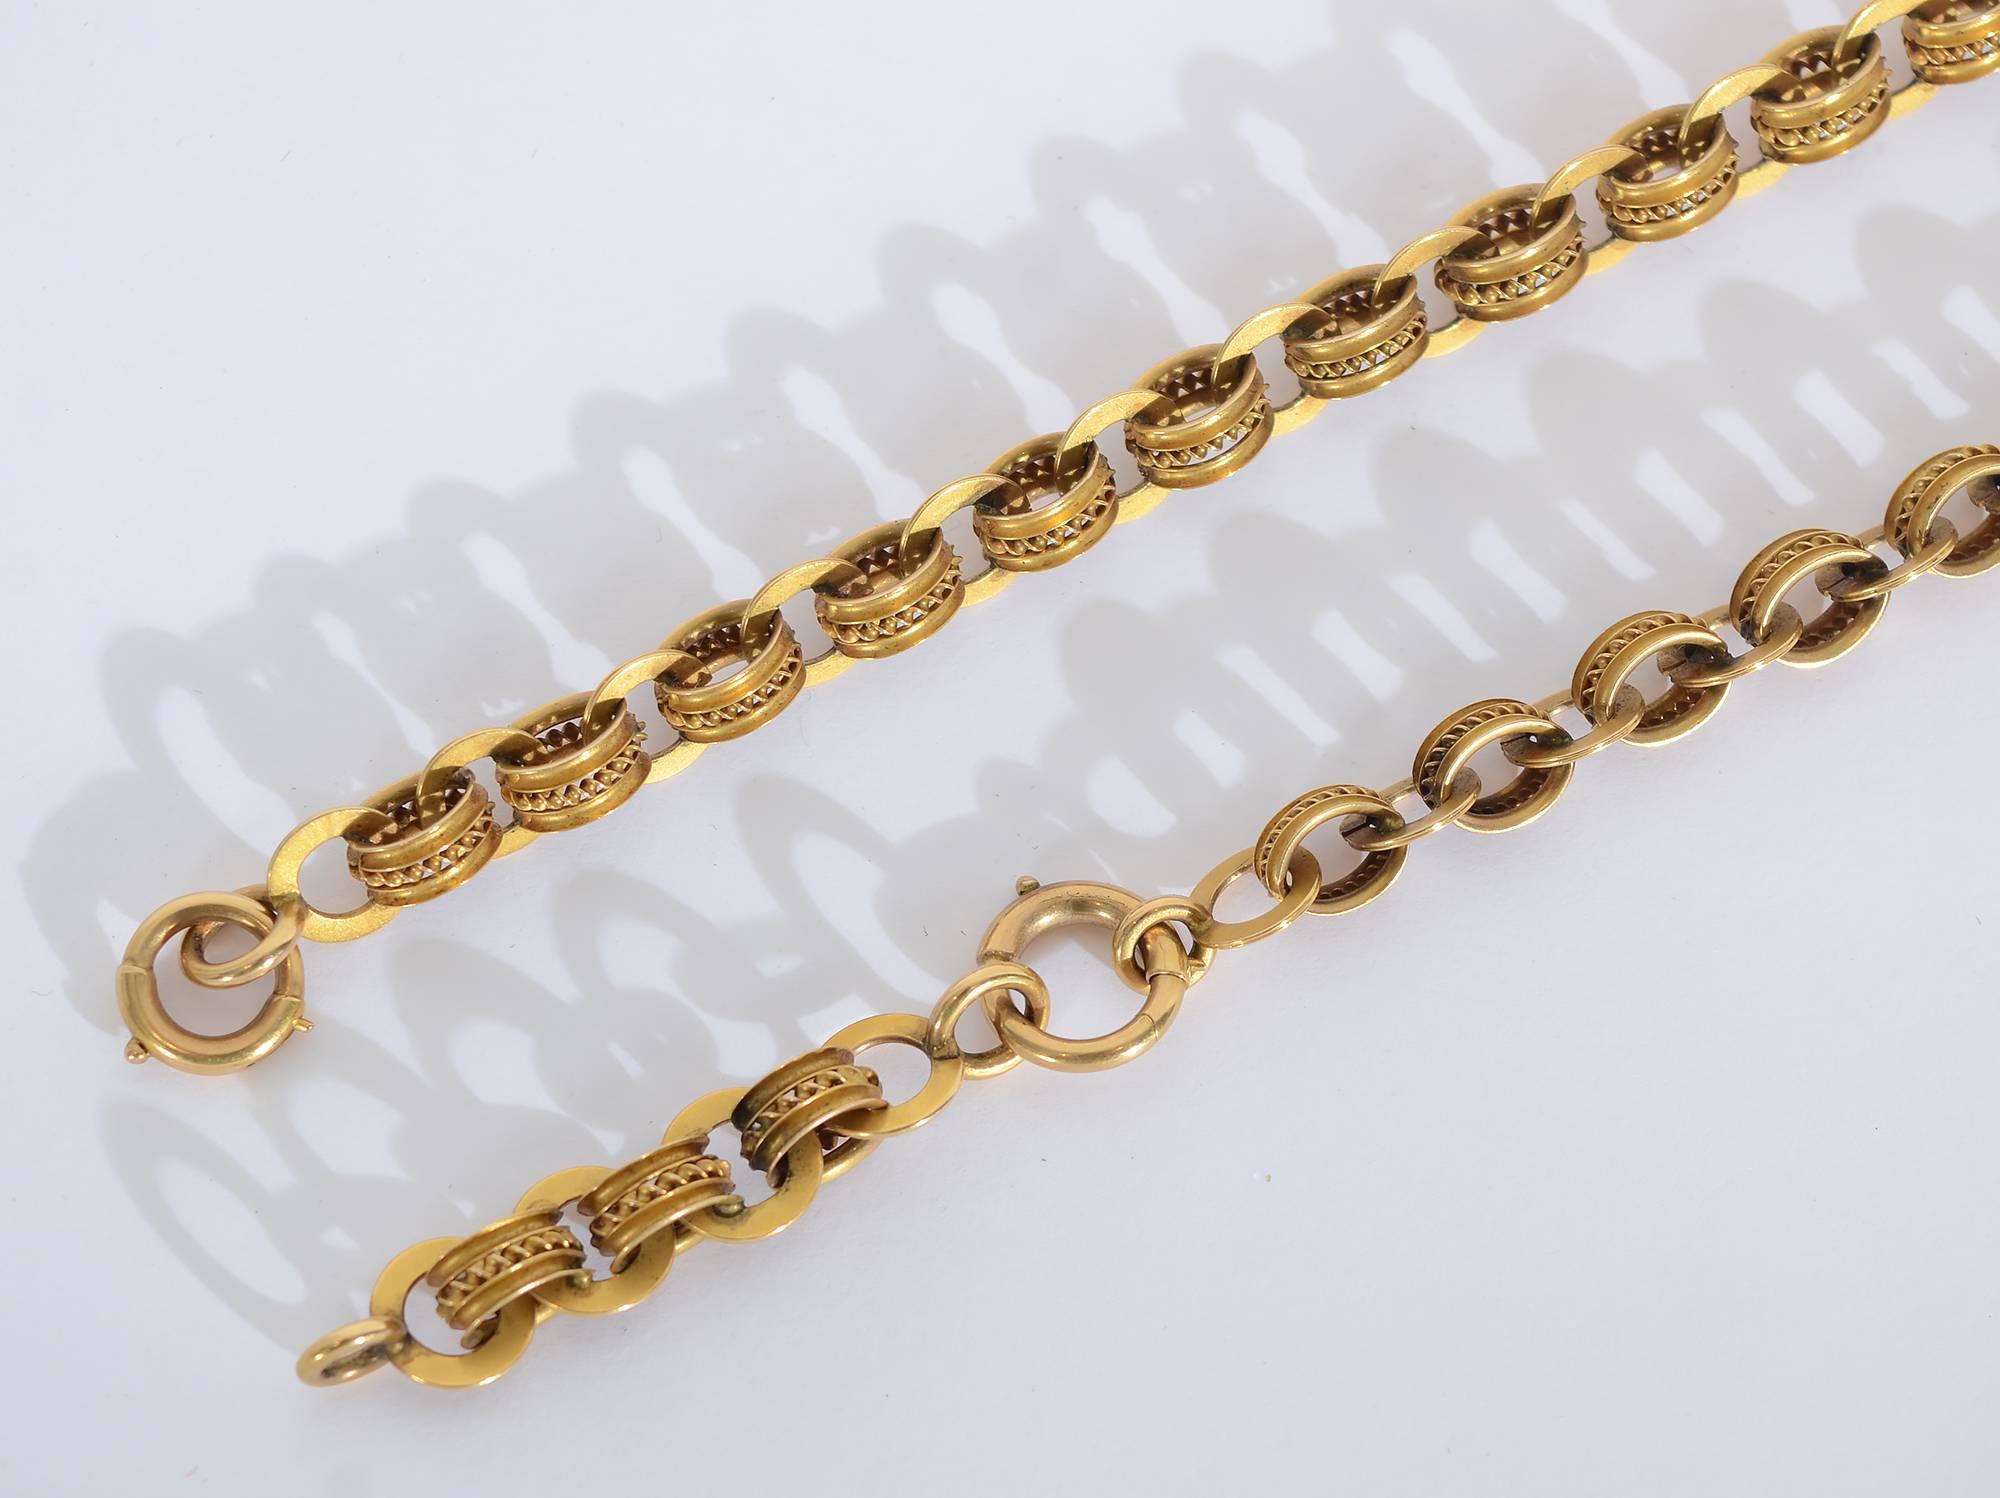 Women's or Men's Handmade Victorian Gold Chain Necklace